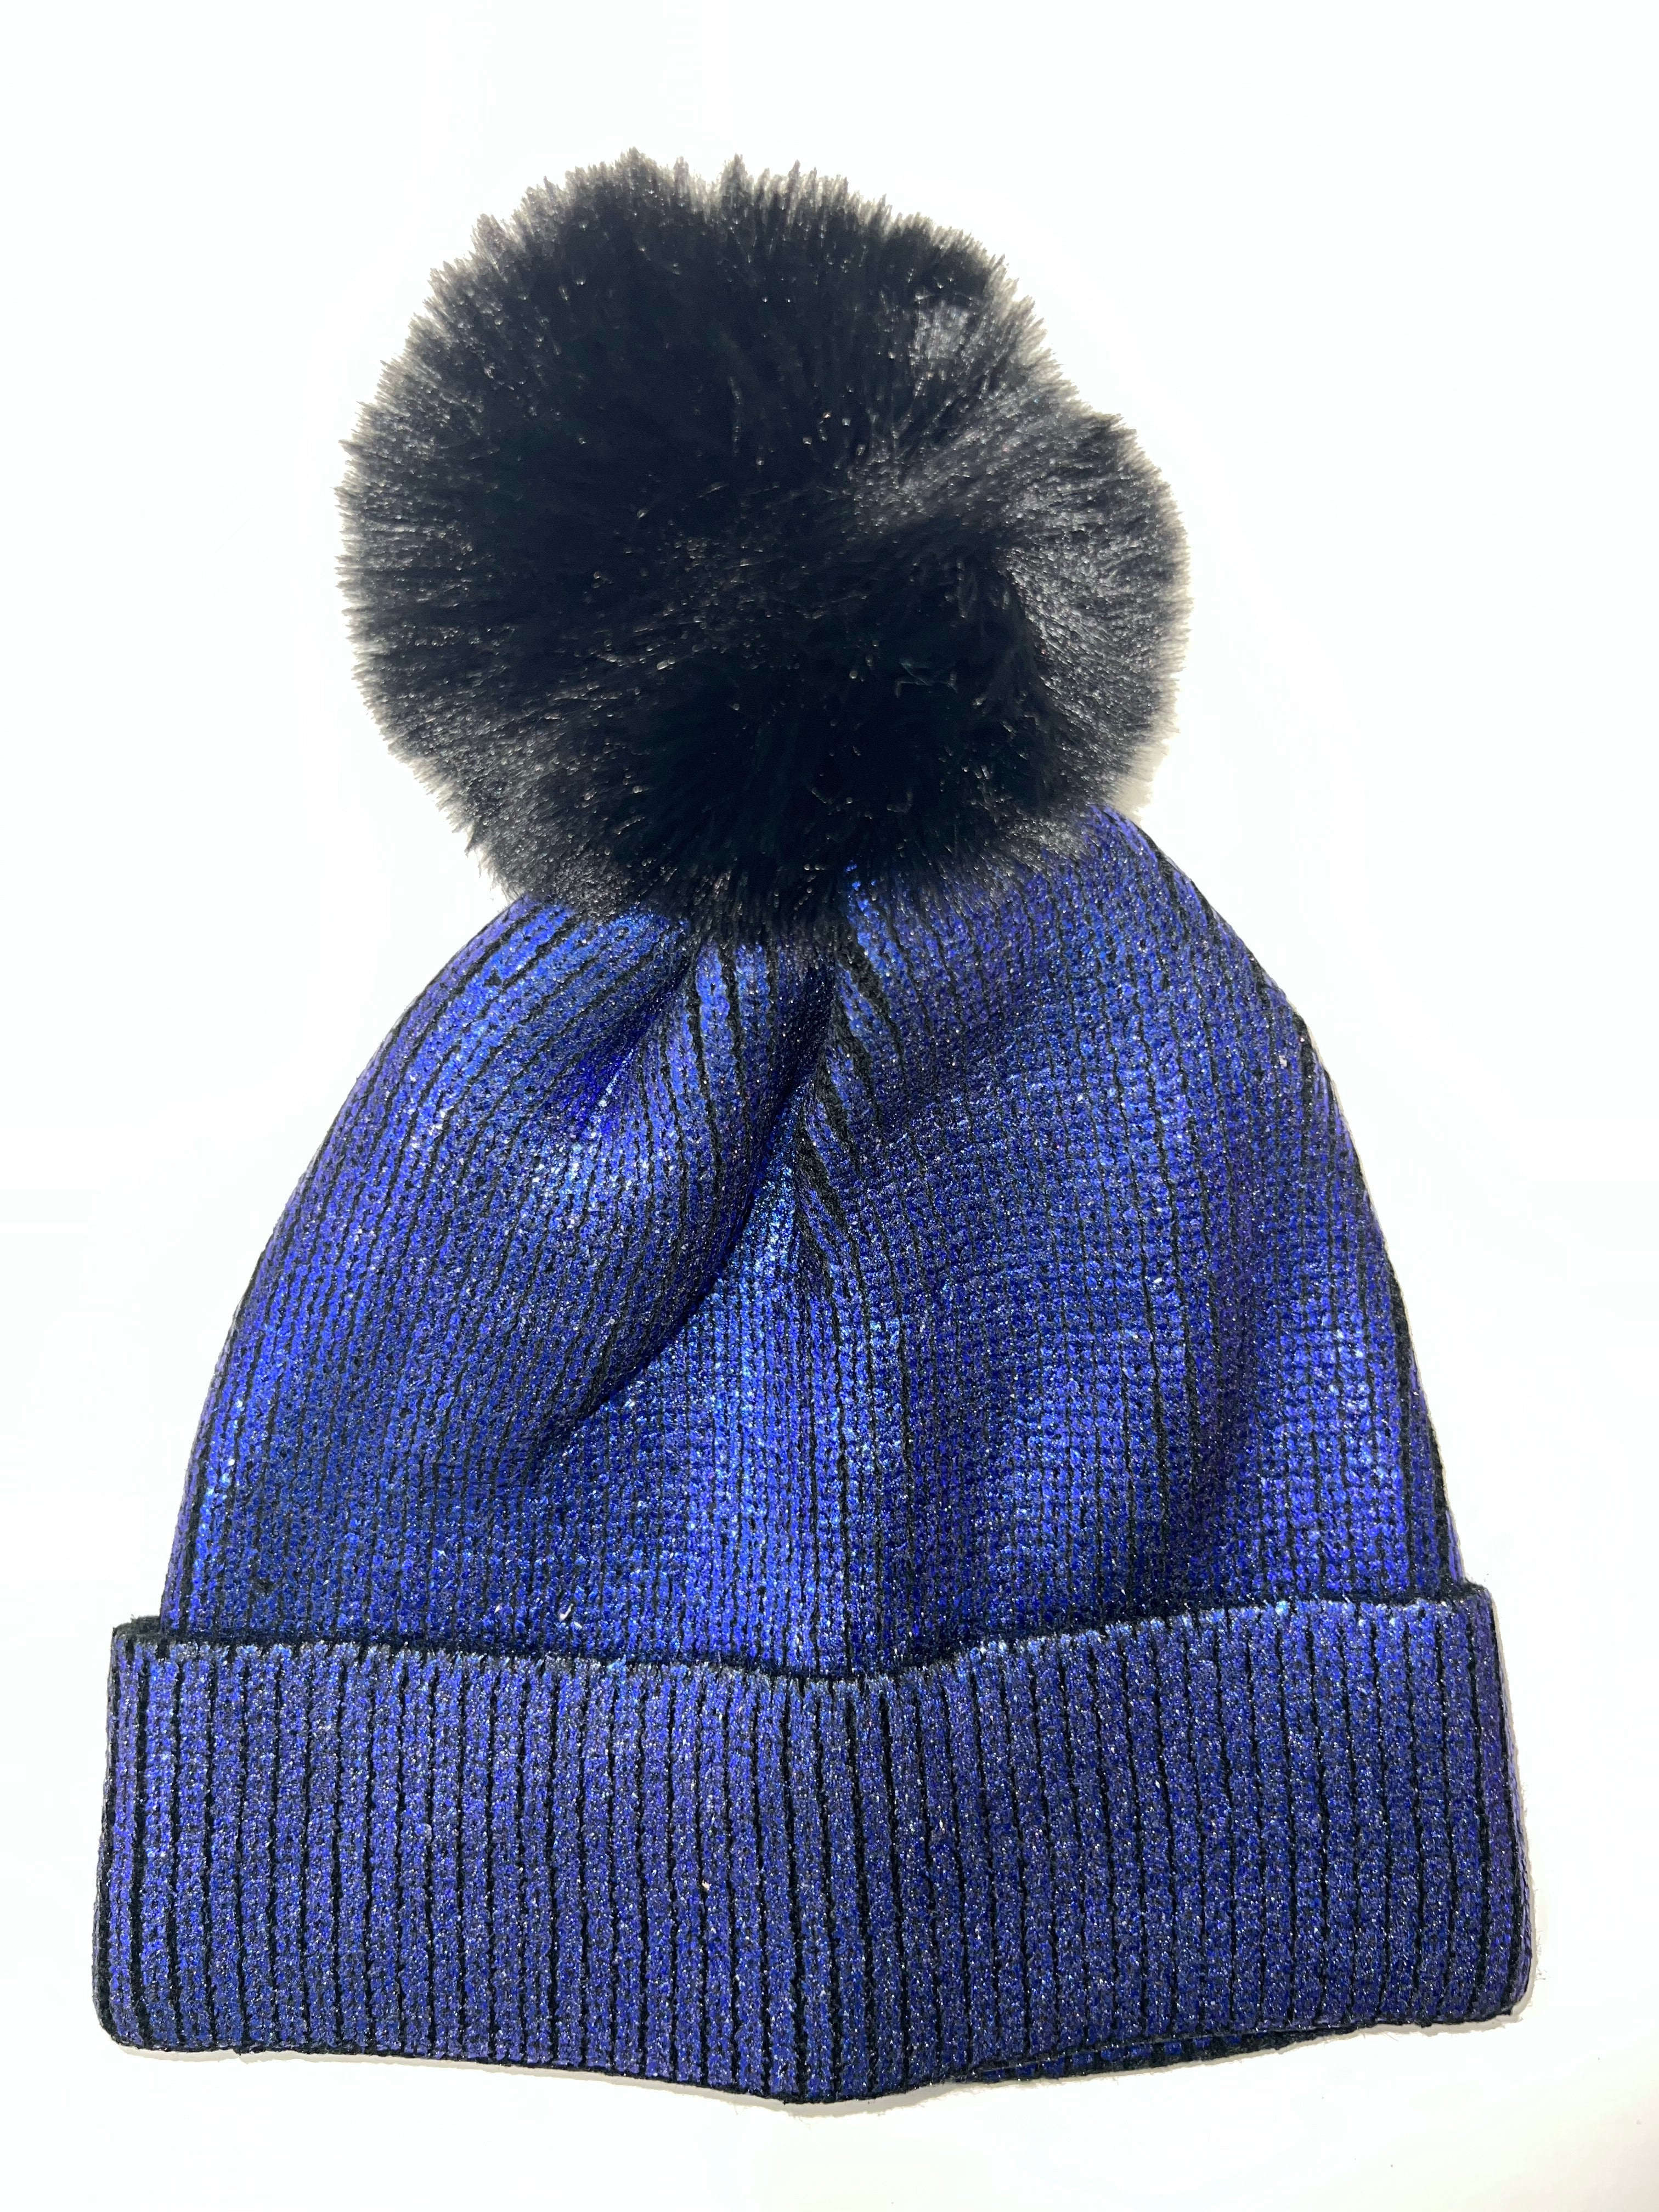 The Pom Pom Winter Hat  - Purple Letters / Initials